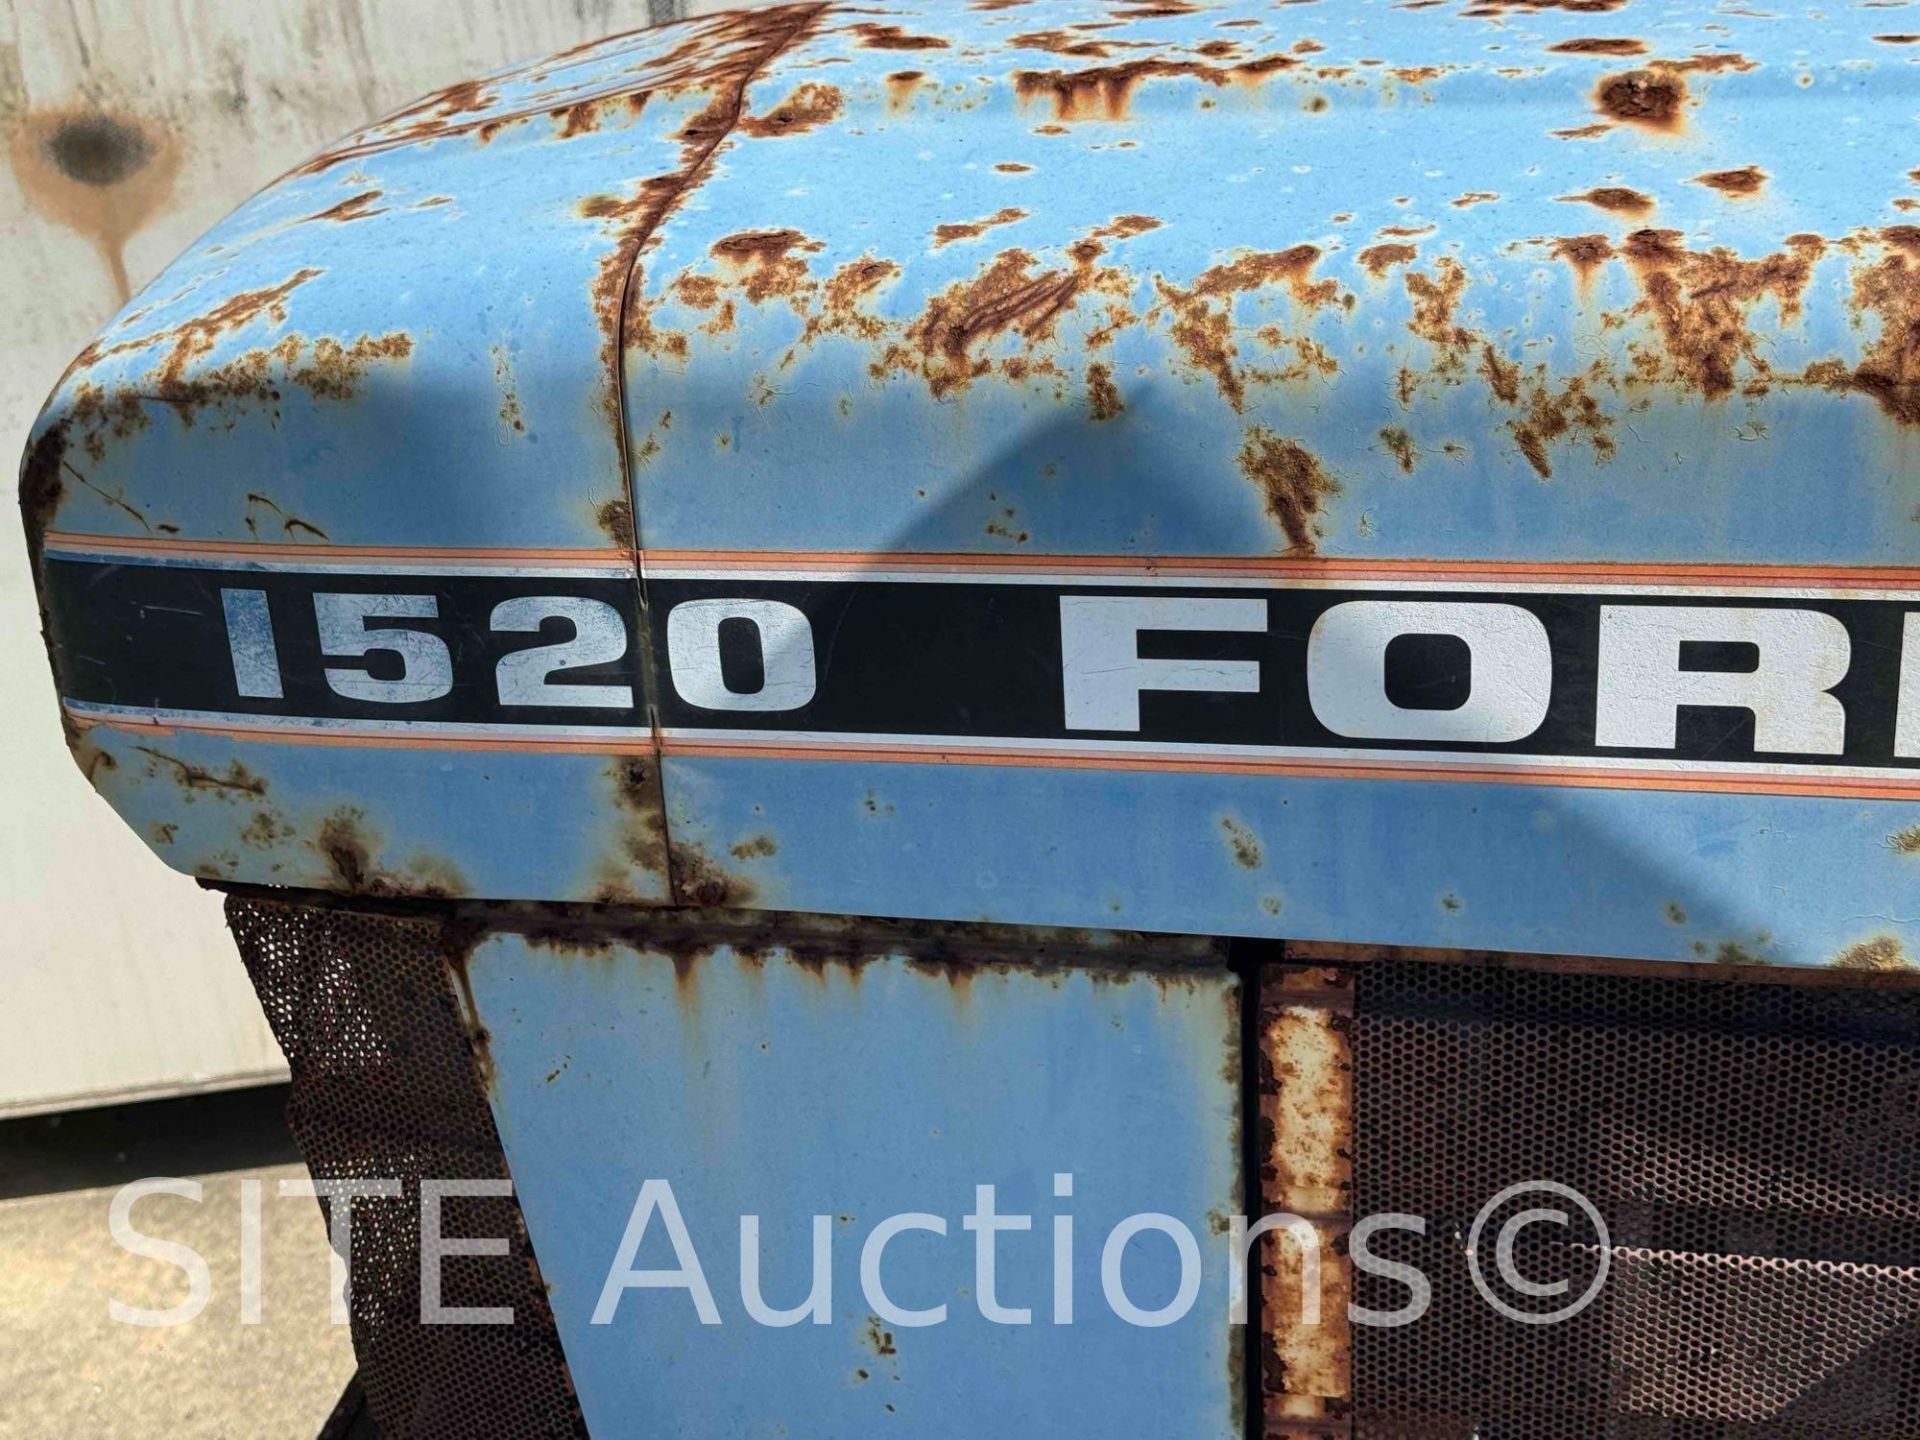 Ford 1520 Tractor - Image 15 of 15